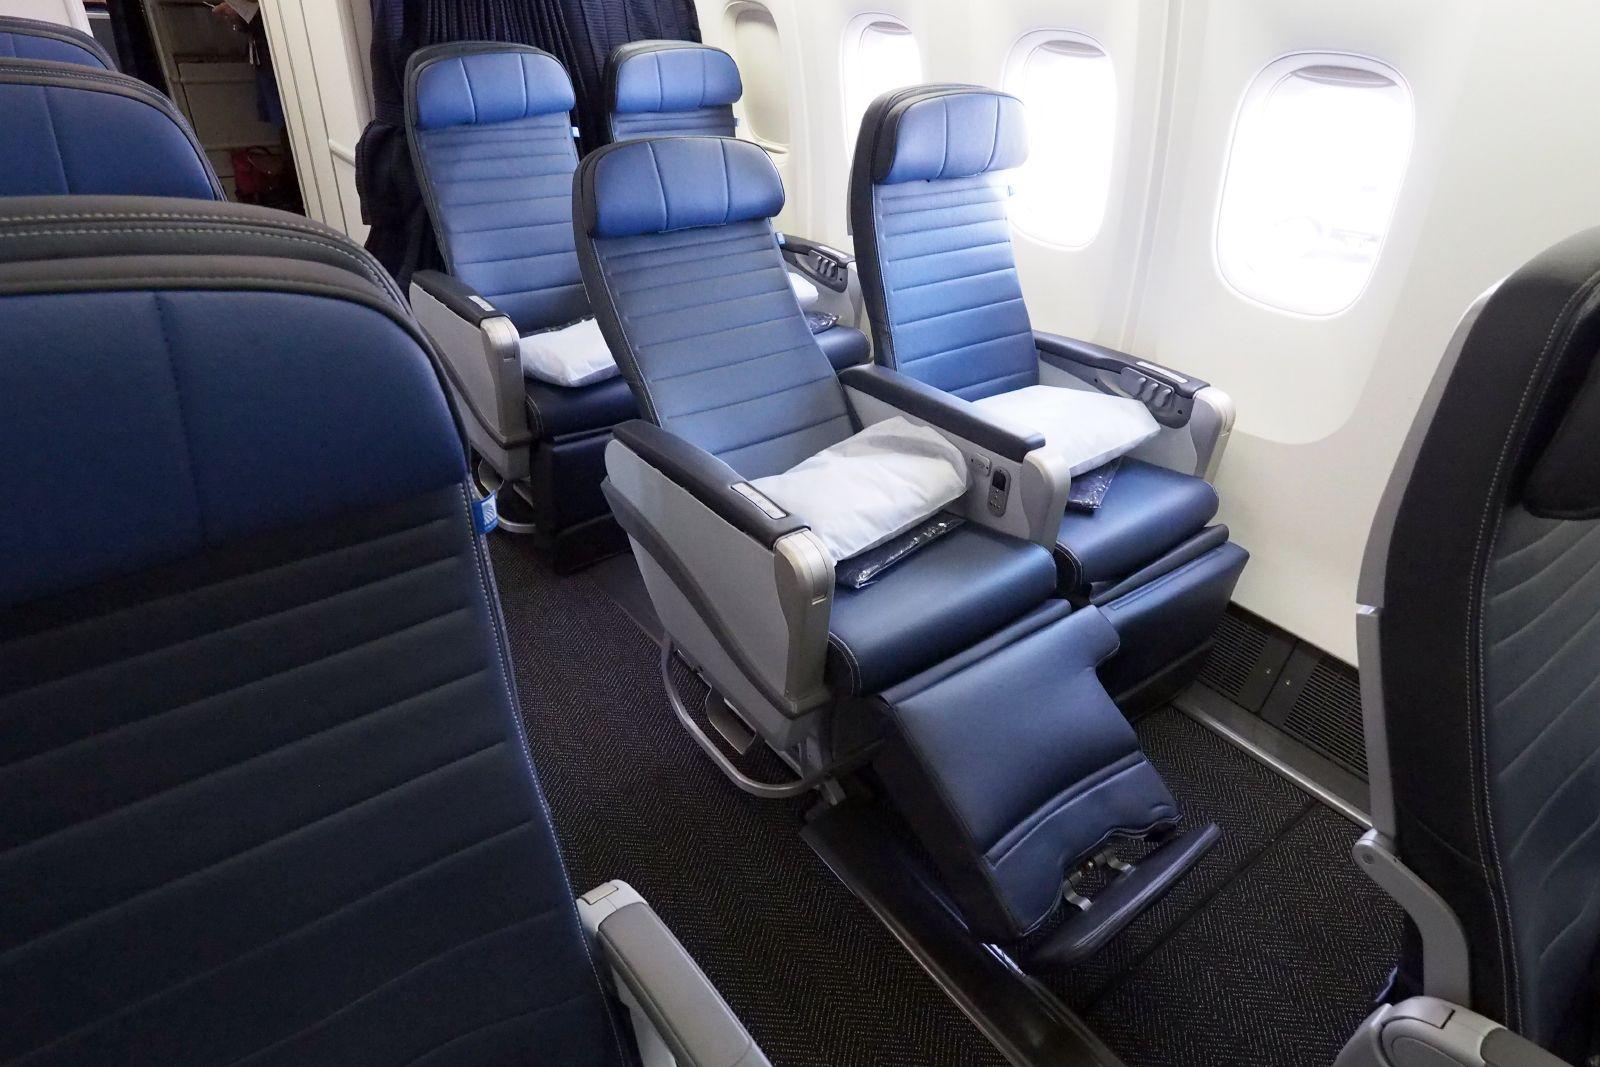 United Economy Seat Logo - The Closest Thing You'll Get to Premium Economy on United